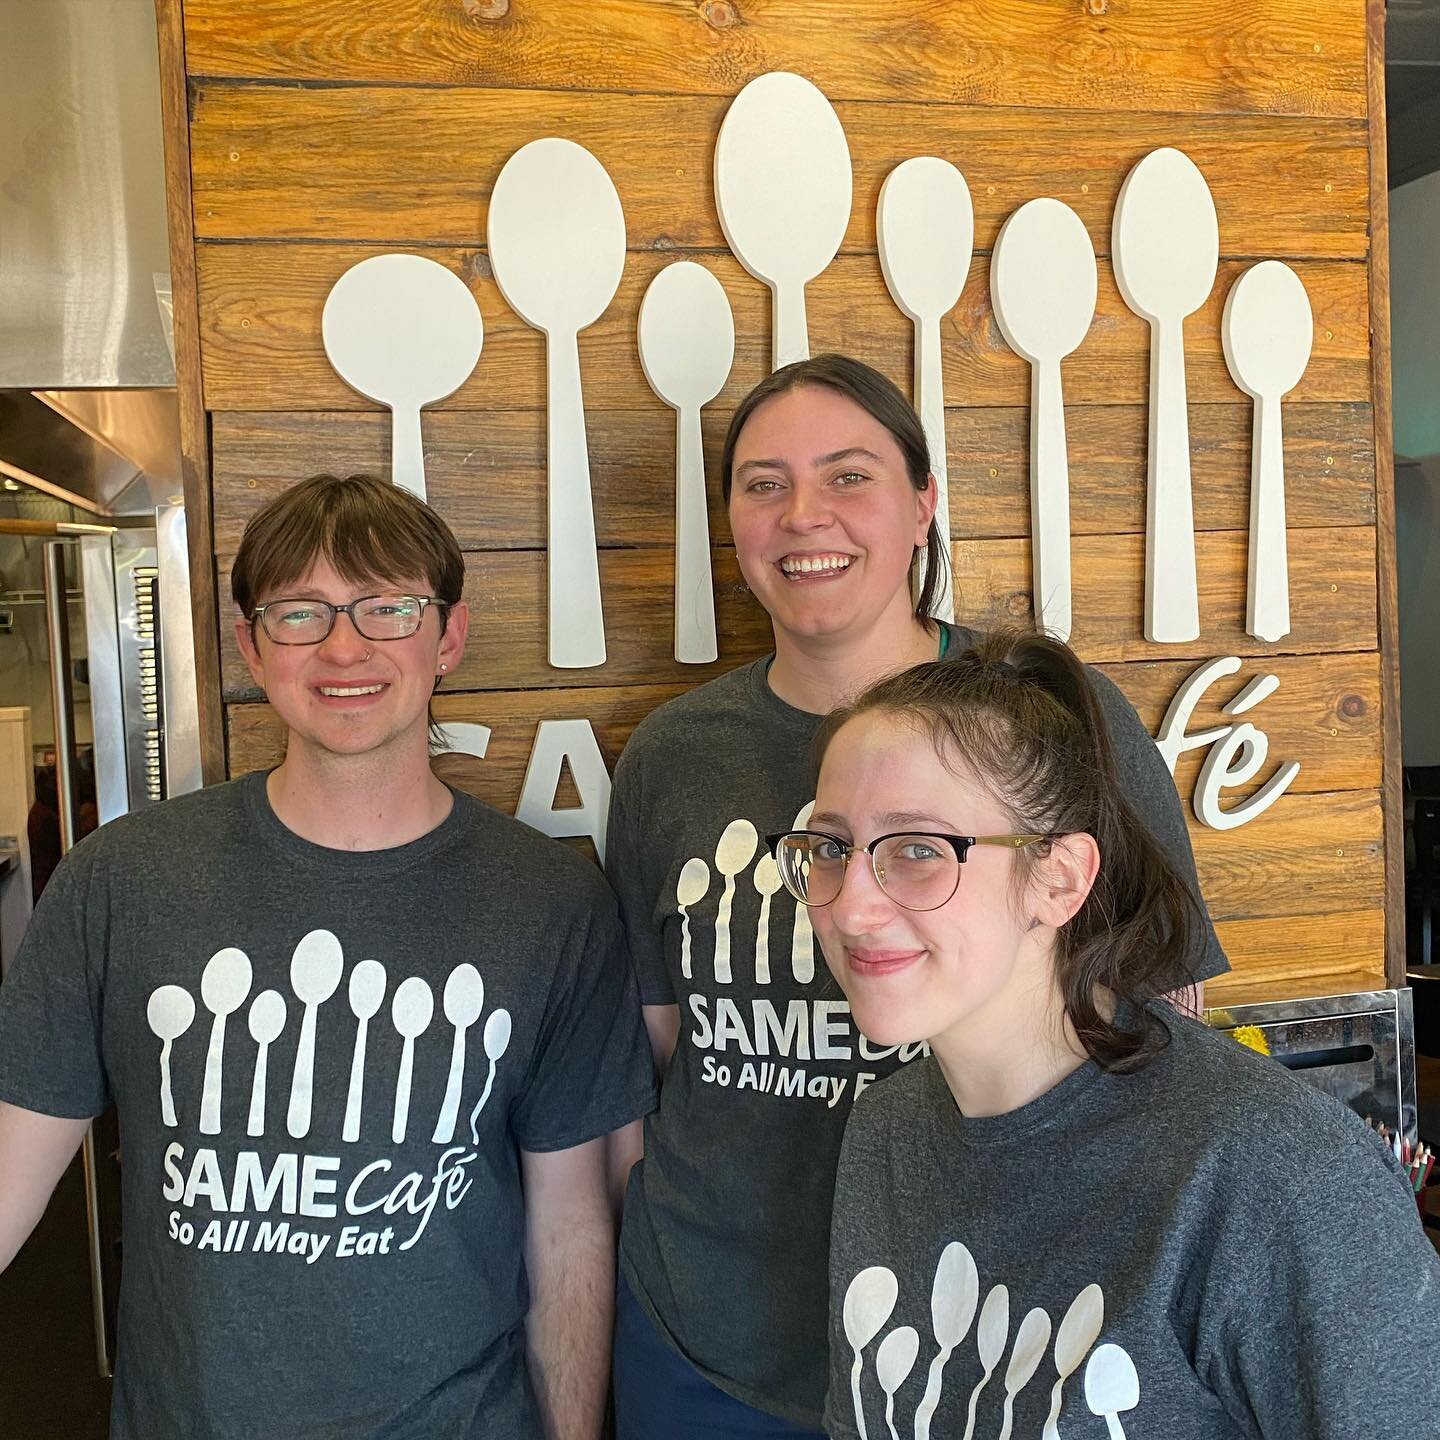 Welcome to Denver, @samecafetoledo!! Kayla, Lee, and Sarah from SAME Cafe Toledo will be in Denver with our team for the rest of this week. Stop by to say hello and meet the team! 

#samecafetoledo #samecafedenver #communitycafe #healthyfoodaccess